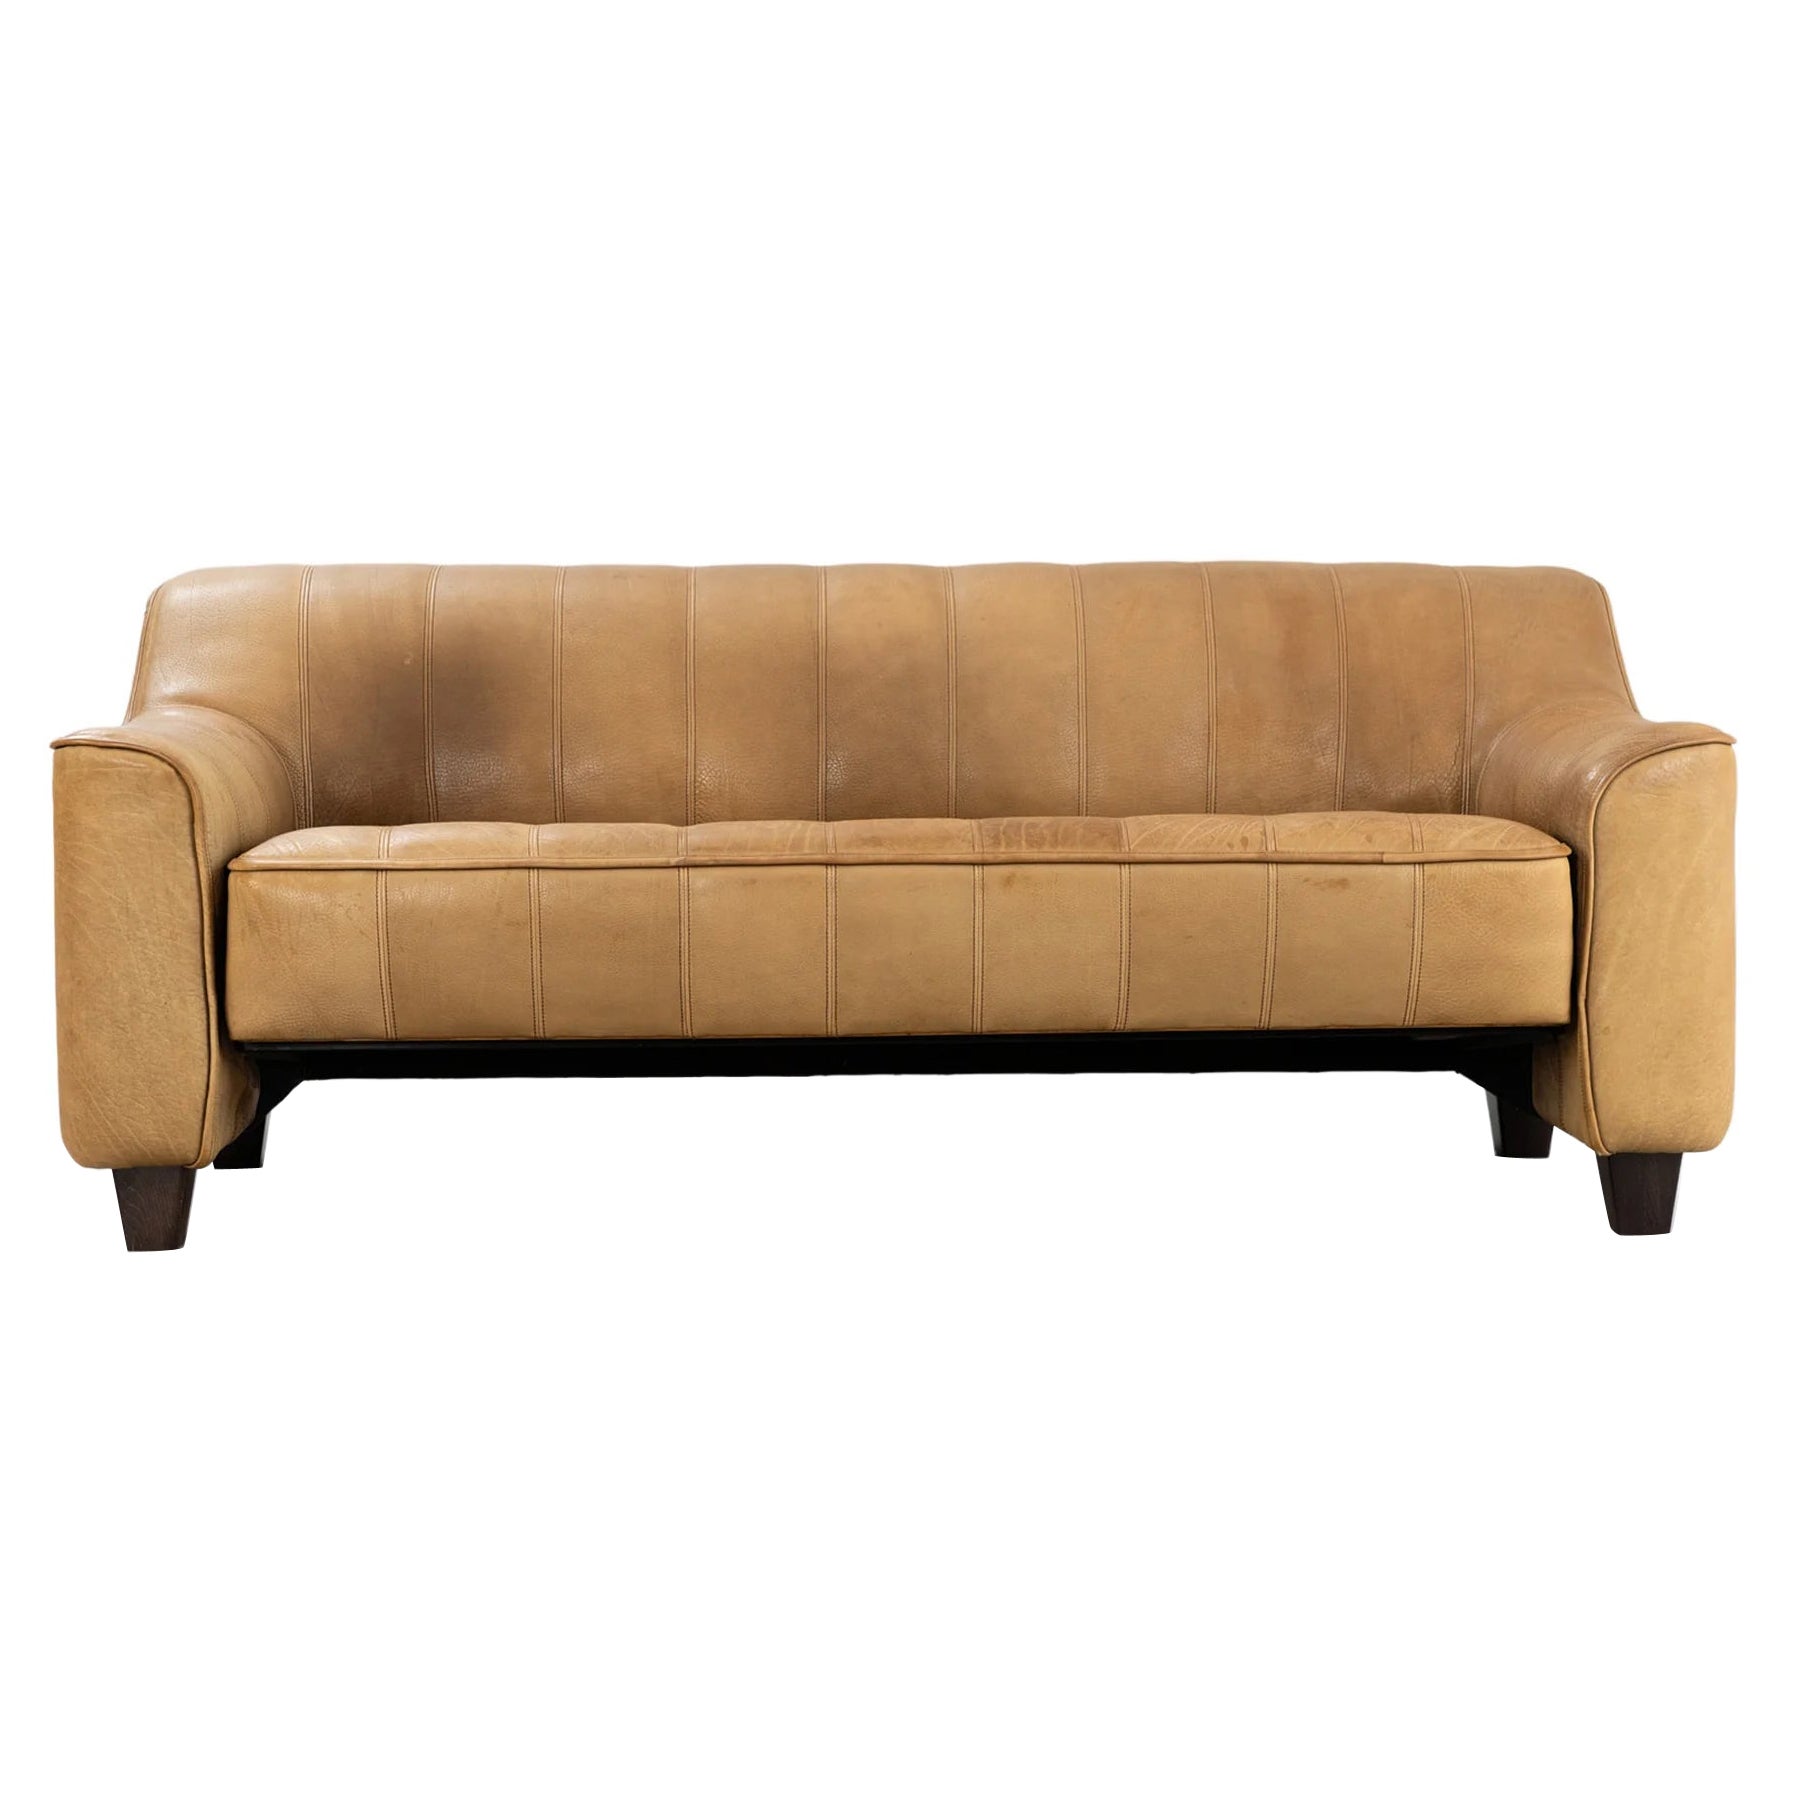 Ds 44 three seat sofa in buffalo leather by desede